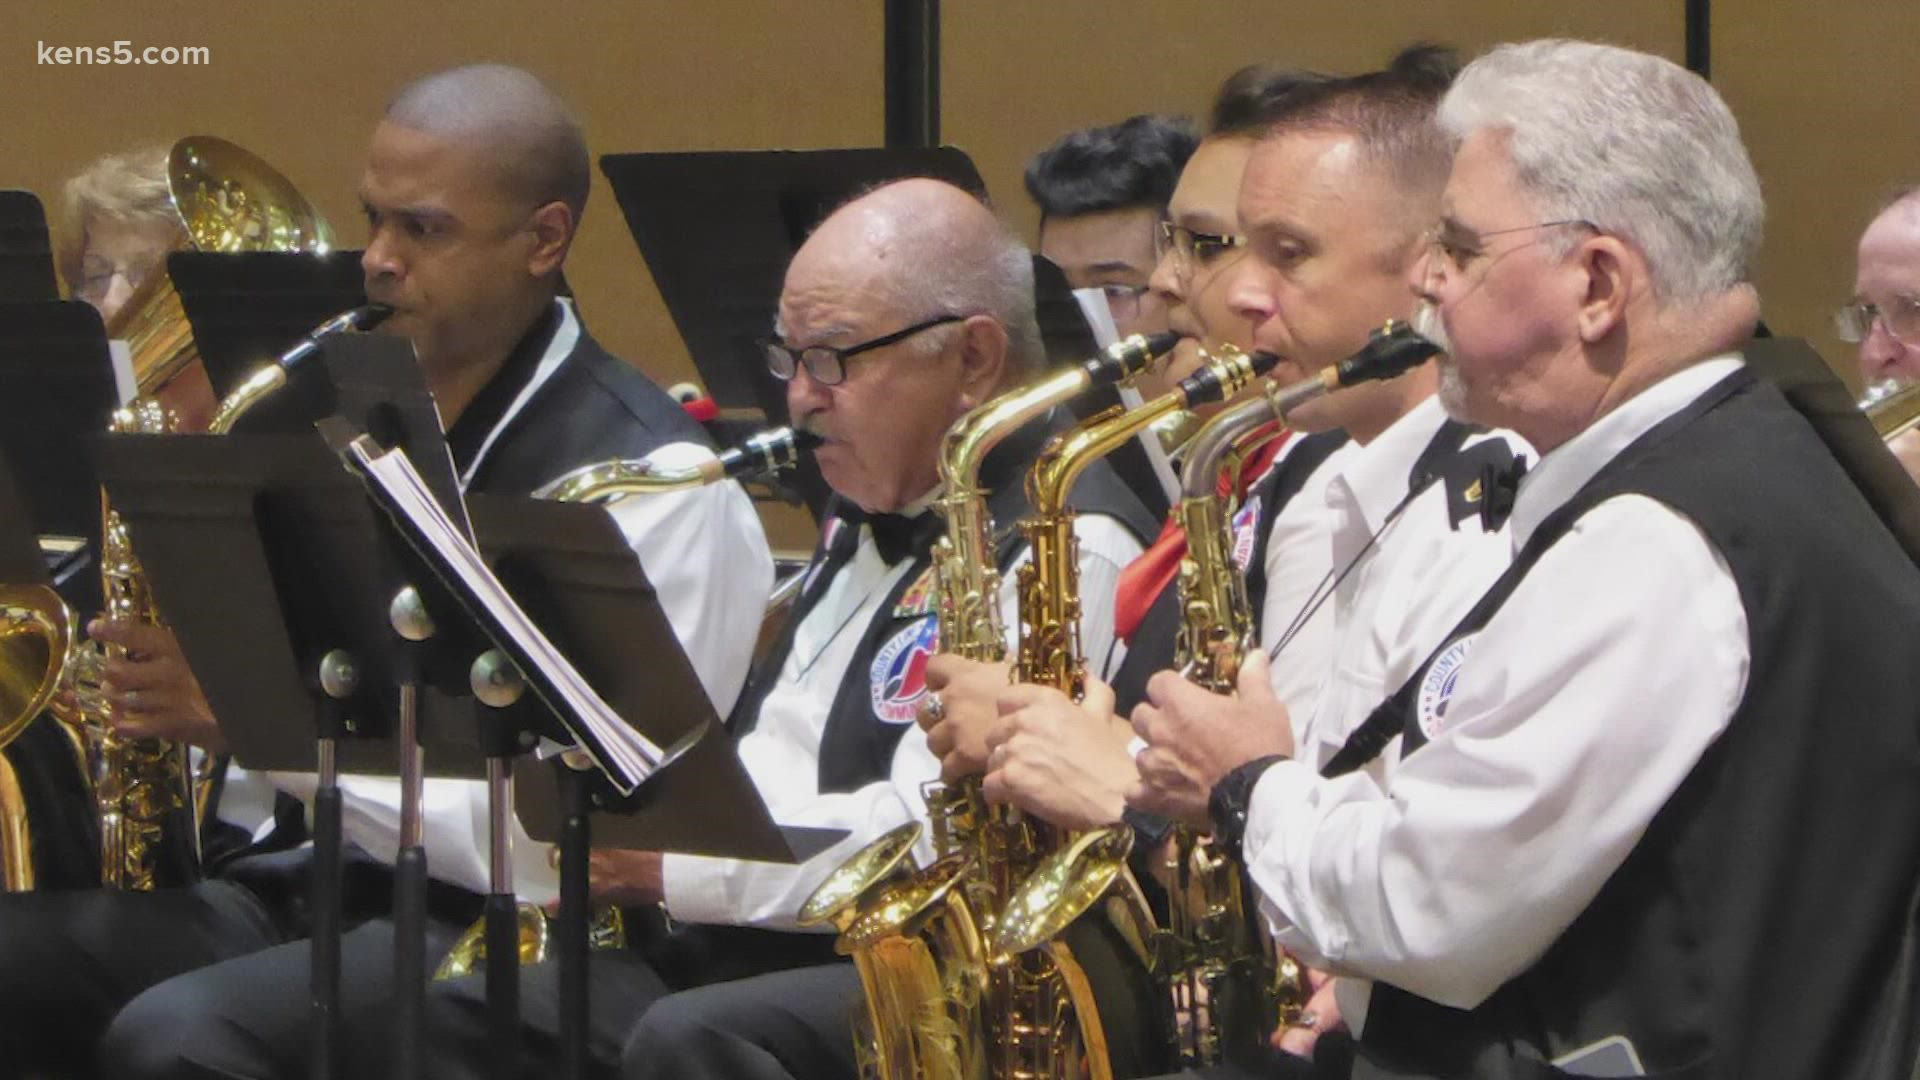 Nine community bands will perform in the first-ever community band festival on March 26.